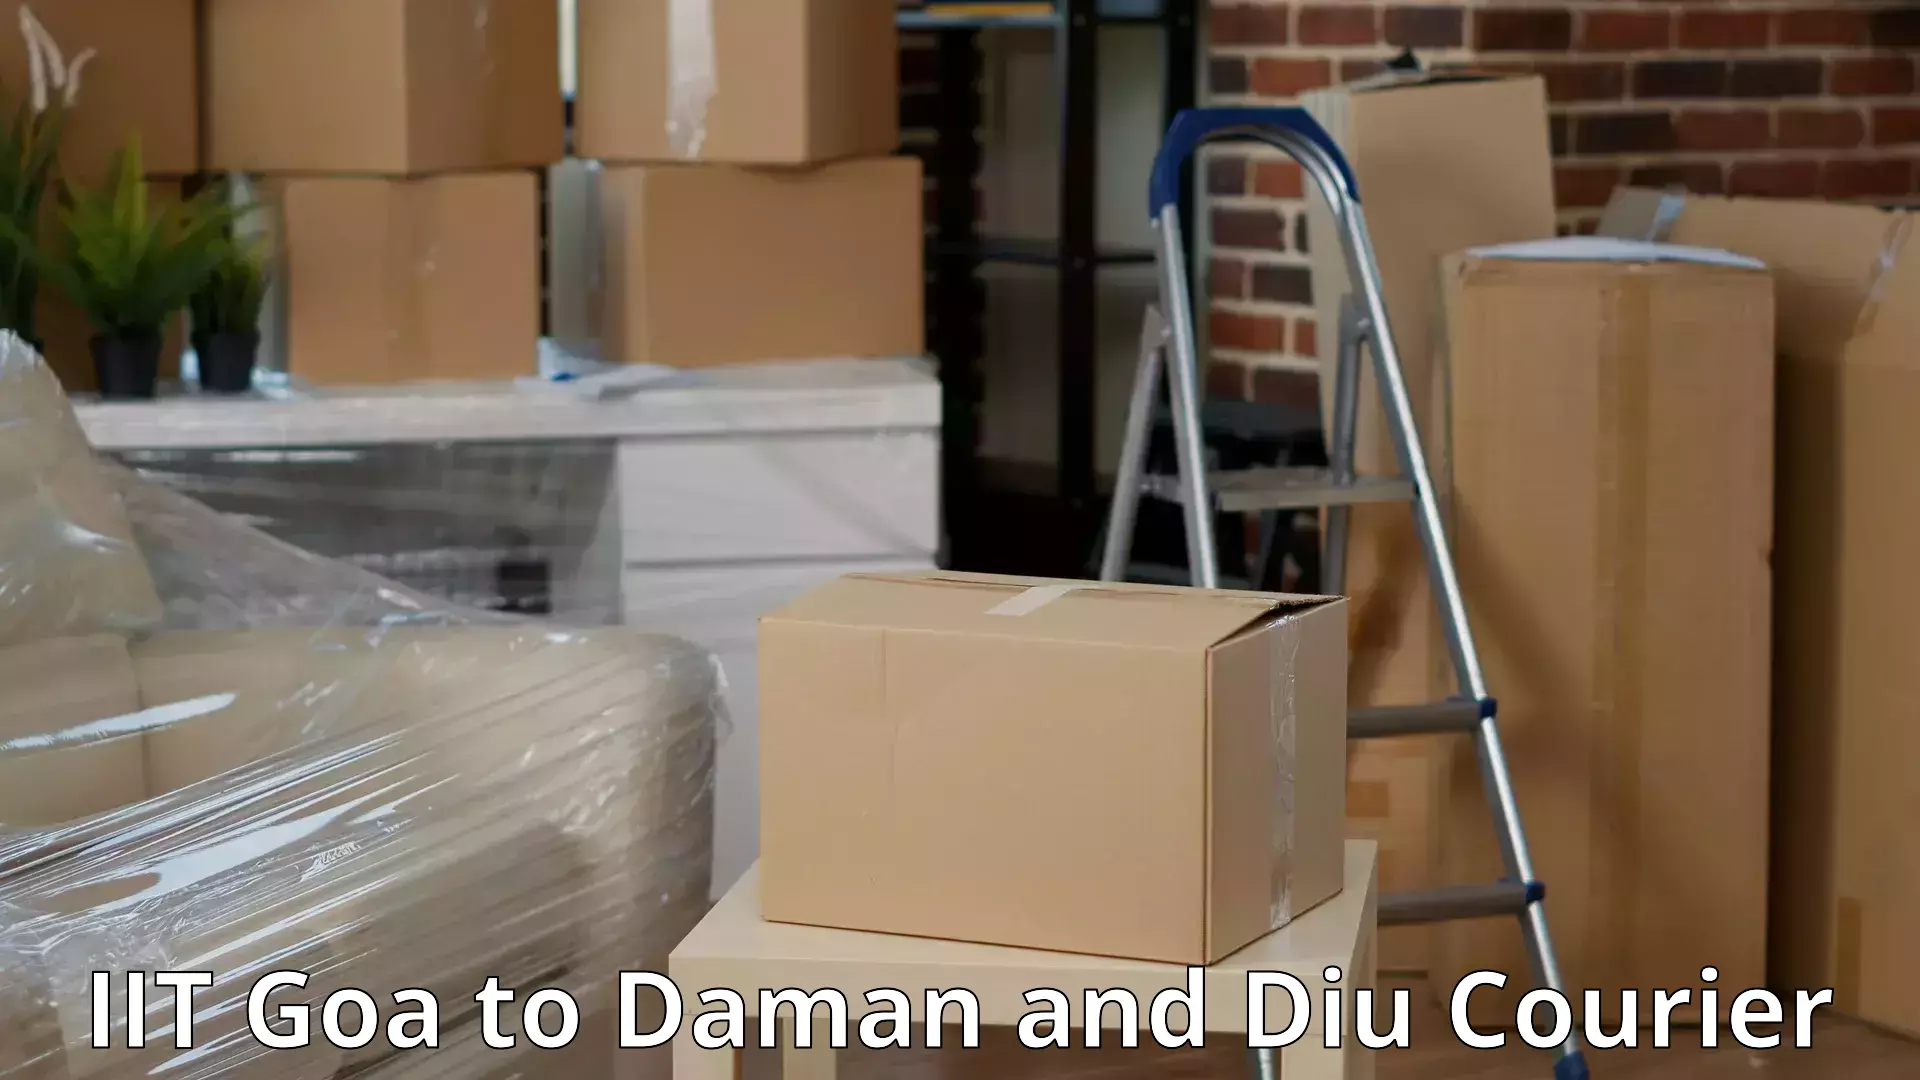 Advanced relocation solutions IIT Goa to Daman